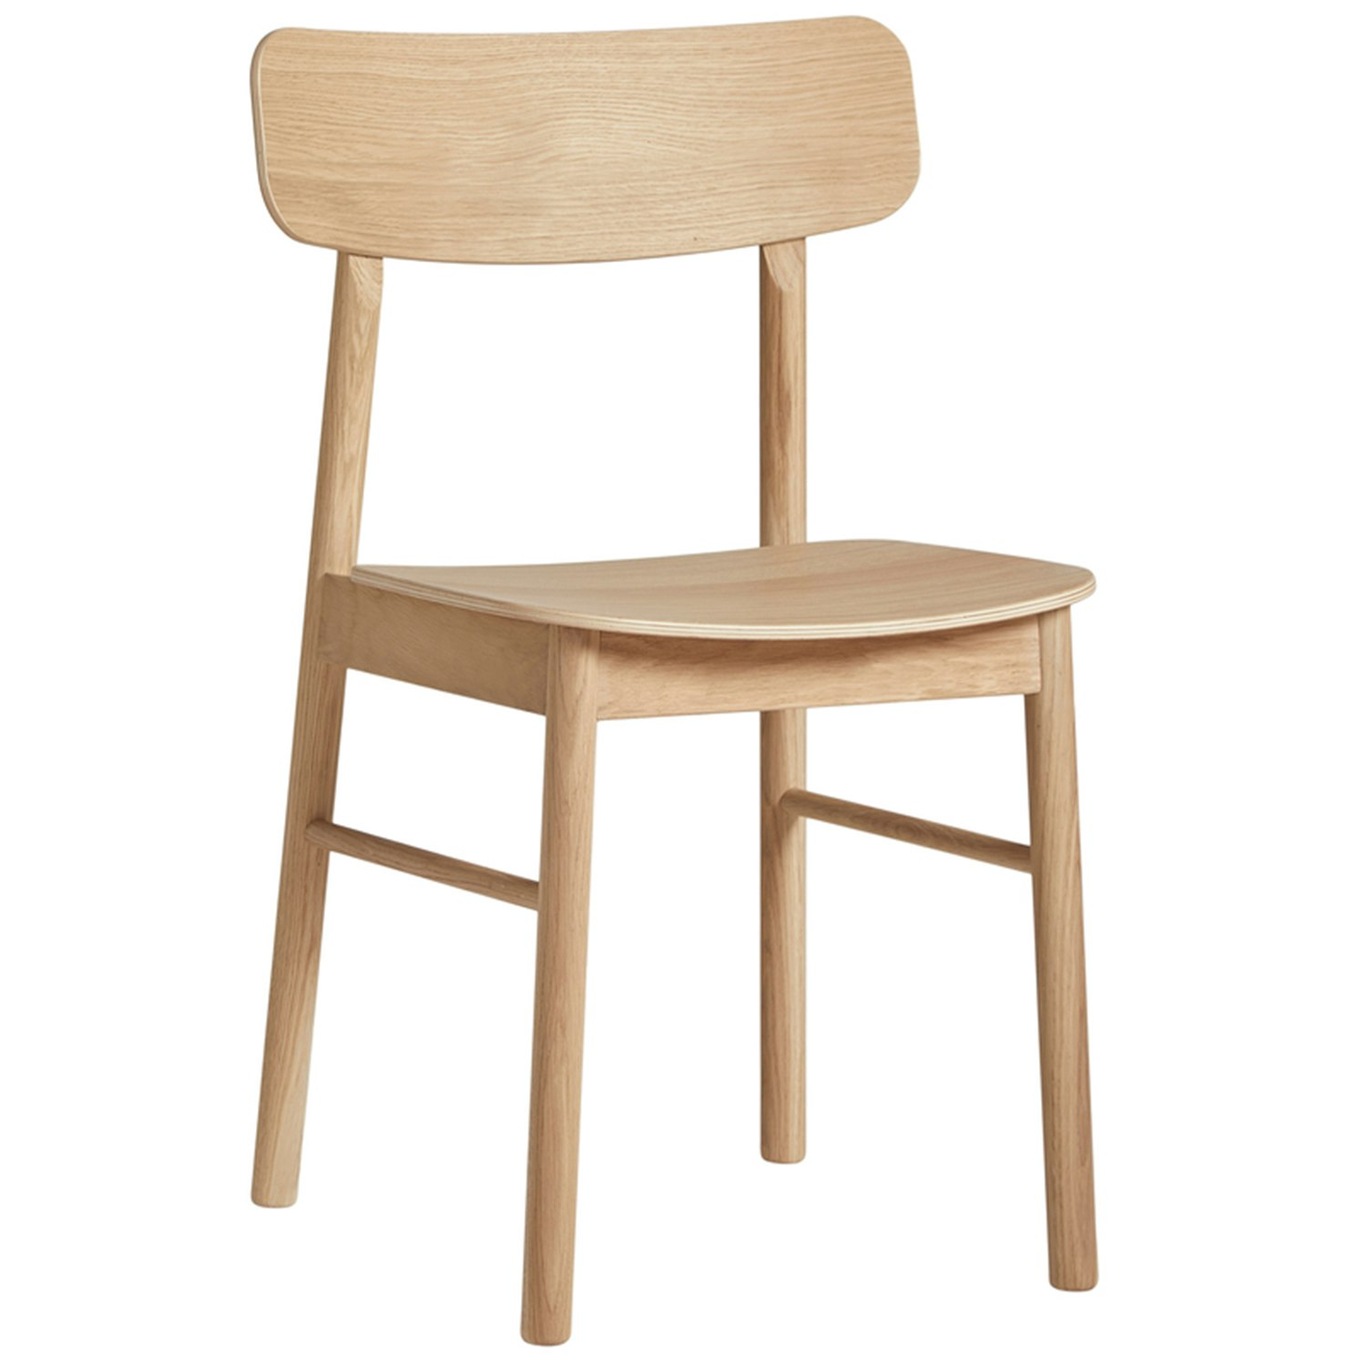 Soma Dining Chair, White Pigmented Oak